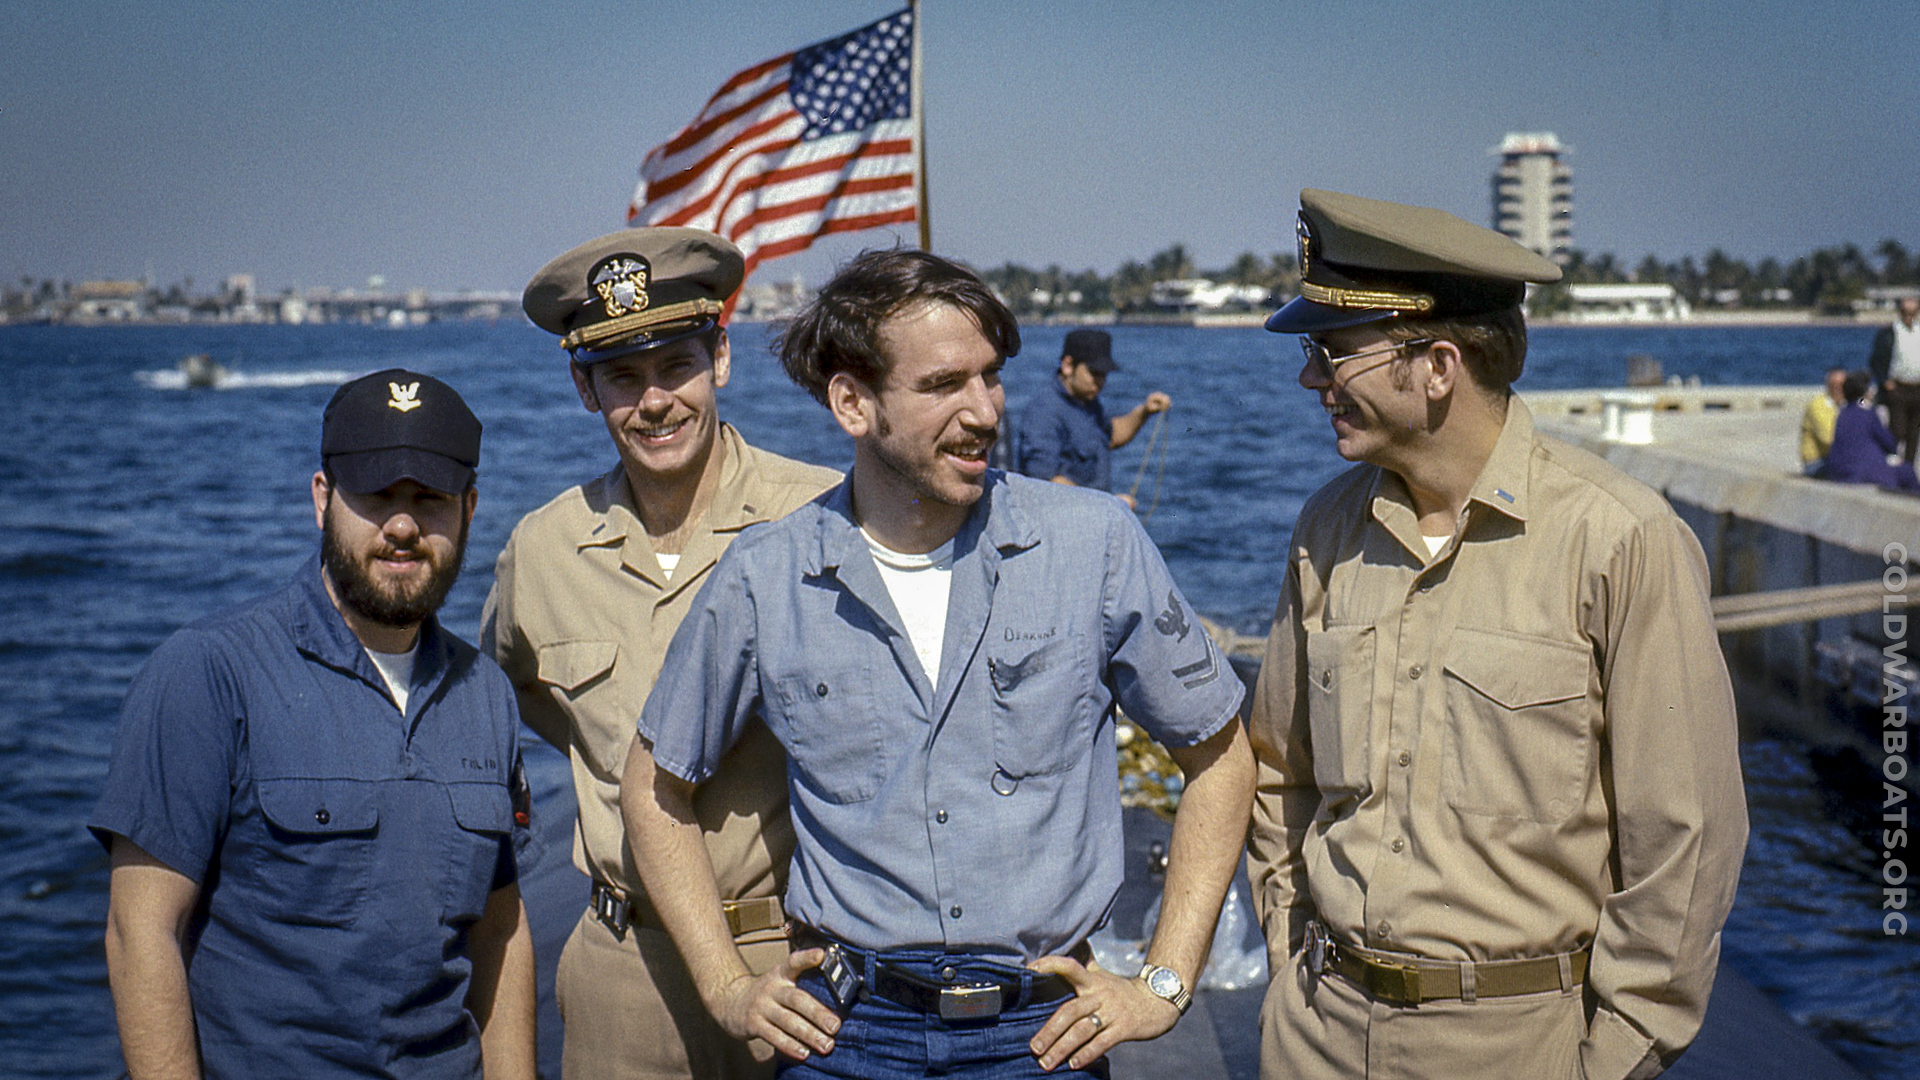 USS WILLIAM H. BATES (SSN 680) - ETR2(SS) Curt Folio, LTJG Jeff Griffiths, ETR2(SS) Ken Deakyne, and LTJG John Dempsey find something to smile about on a bright Ft. Lauderdale morning prepping for public visitor tours ~ 1976 (Neal Degner)